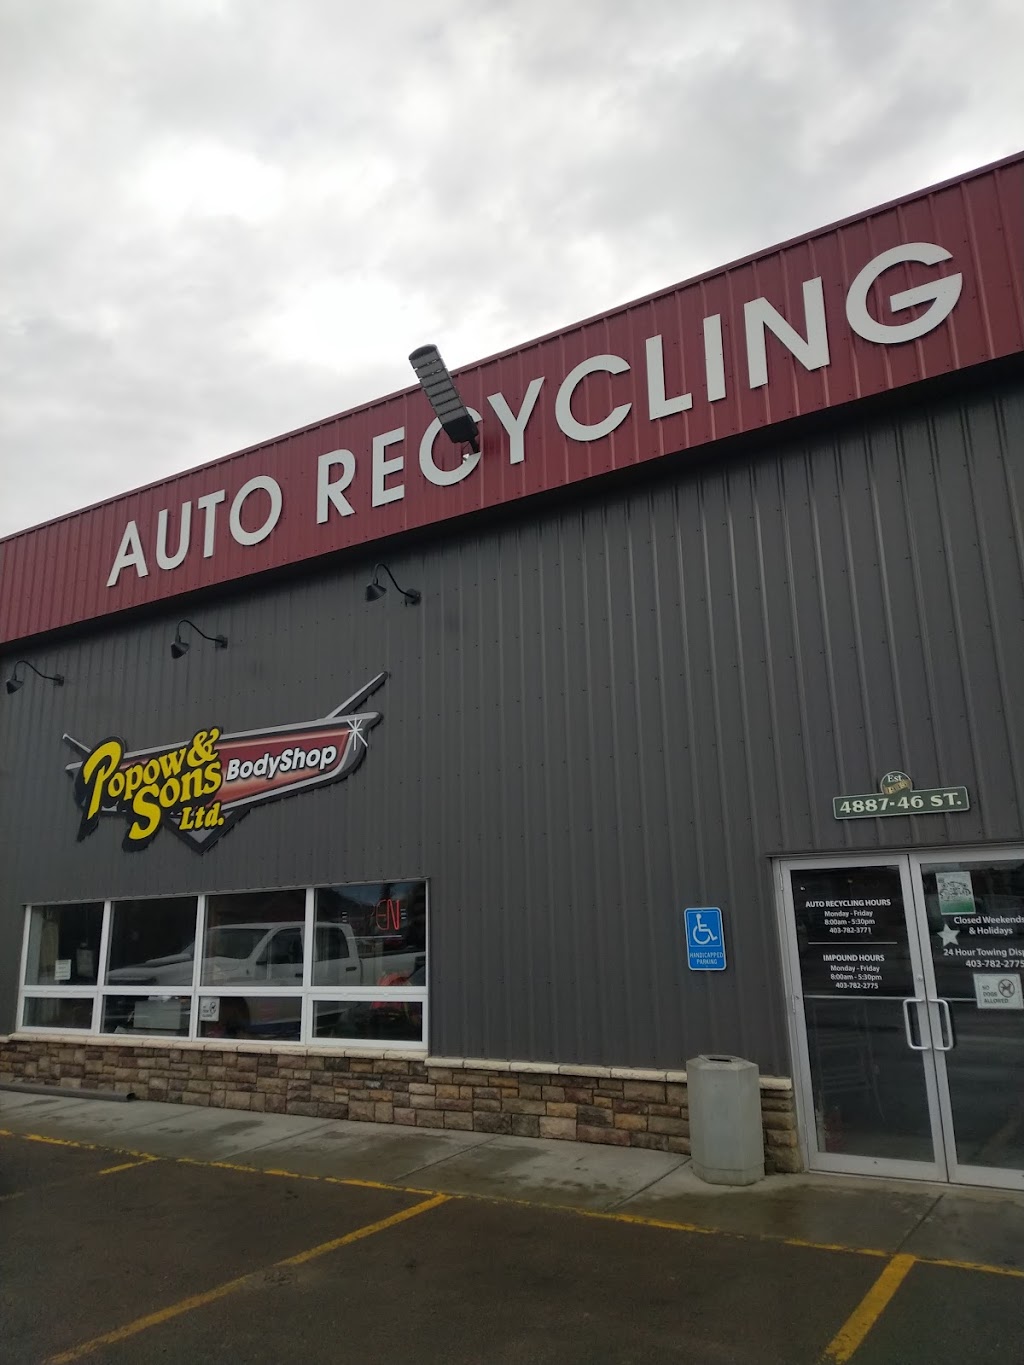 Popows Auto Recycling | car repair | 4887 46 St, Lacombe, AB T4L 2B2, Canada | 4037823771 OR +1 403-782-3771